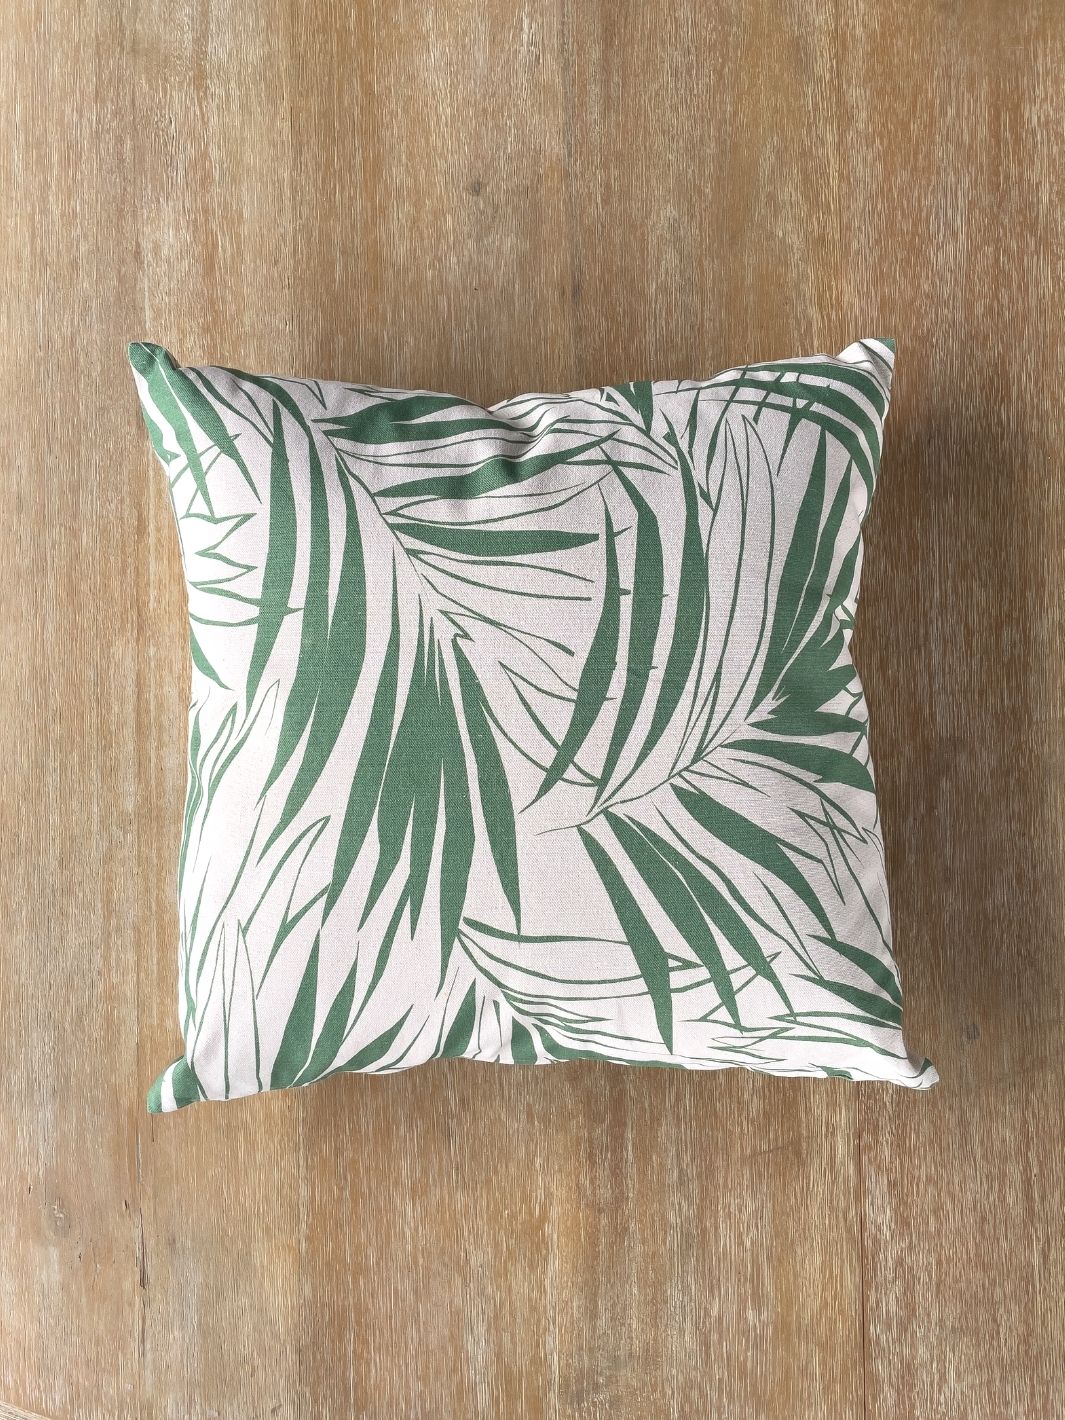 'Majesty Palm' Throw Pillow - Green on Raw Canvas